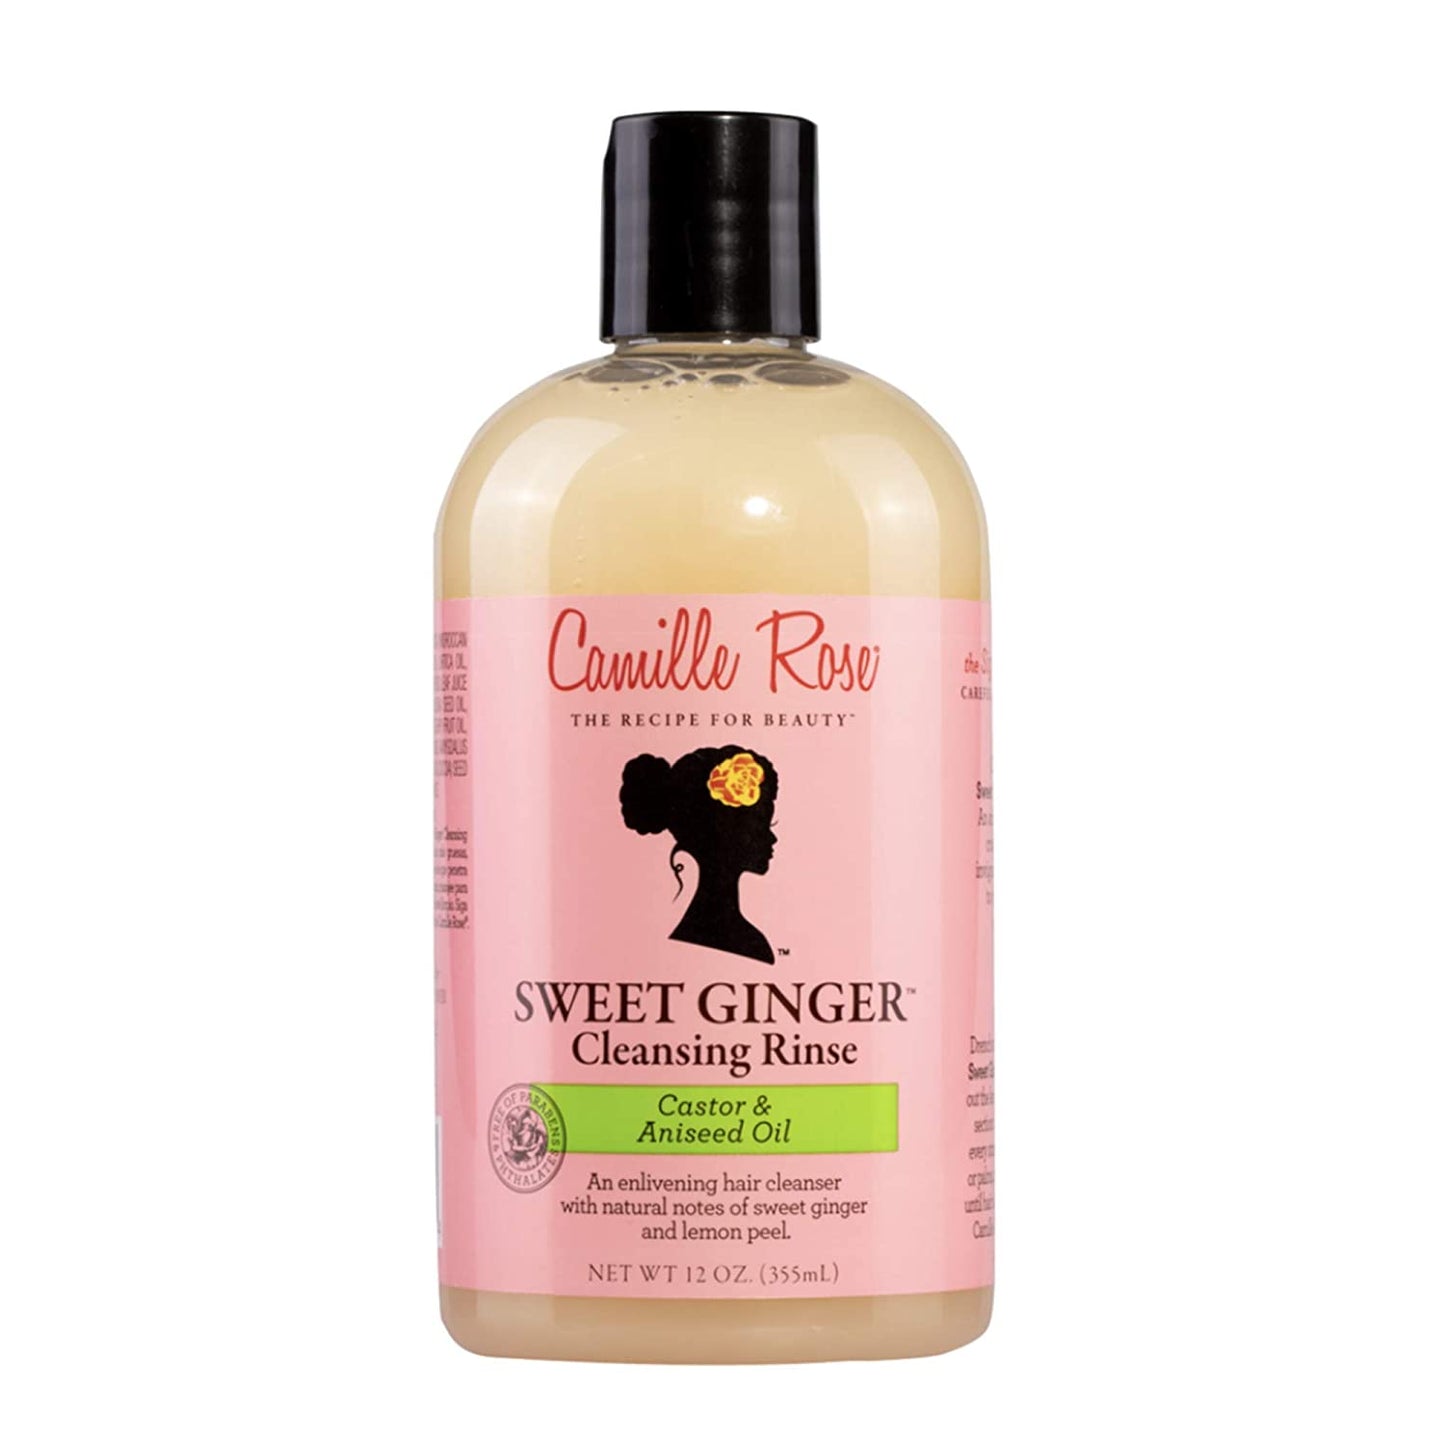 Camille Rose Castor Aniseed Oil Rinse